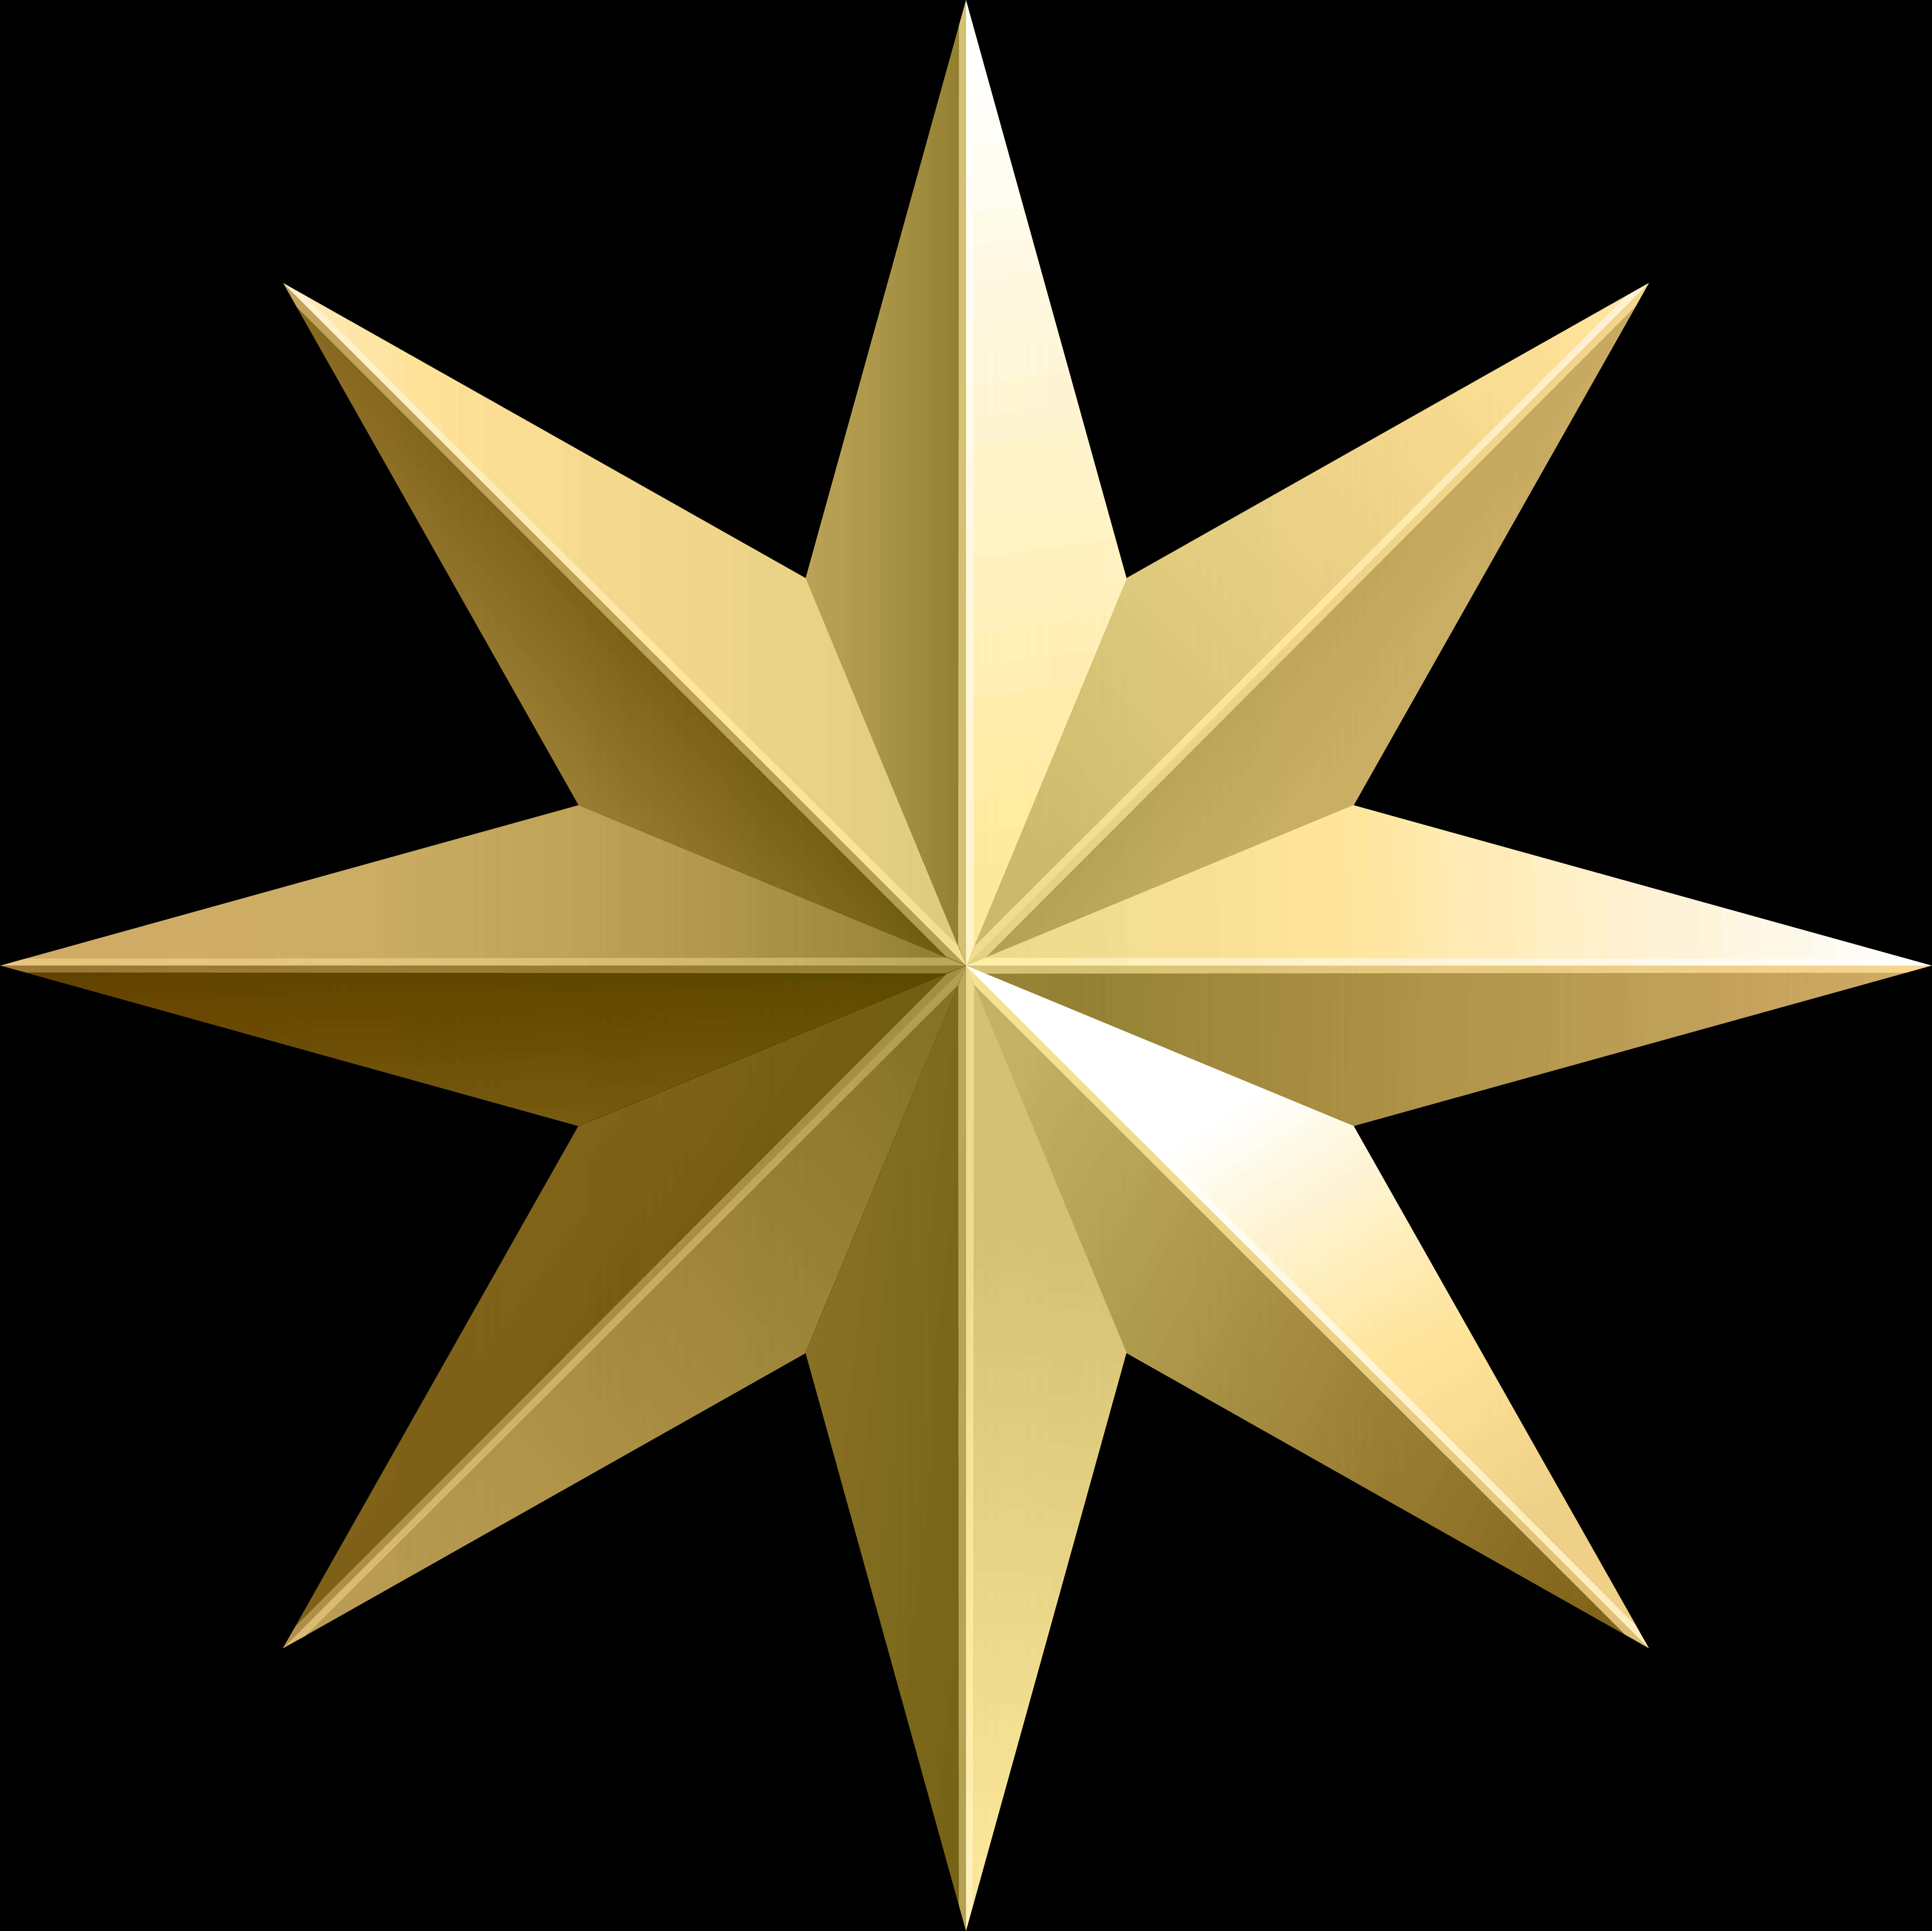 Golden3 D Star Graphic PNG image